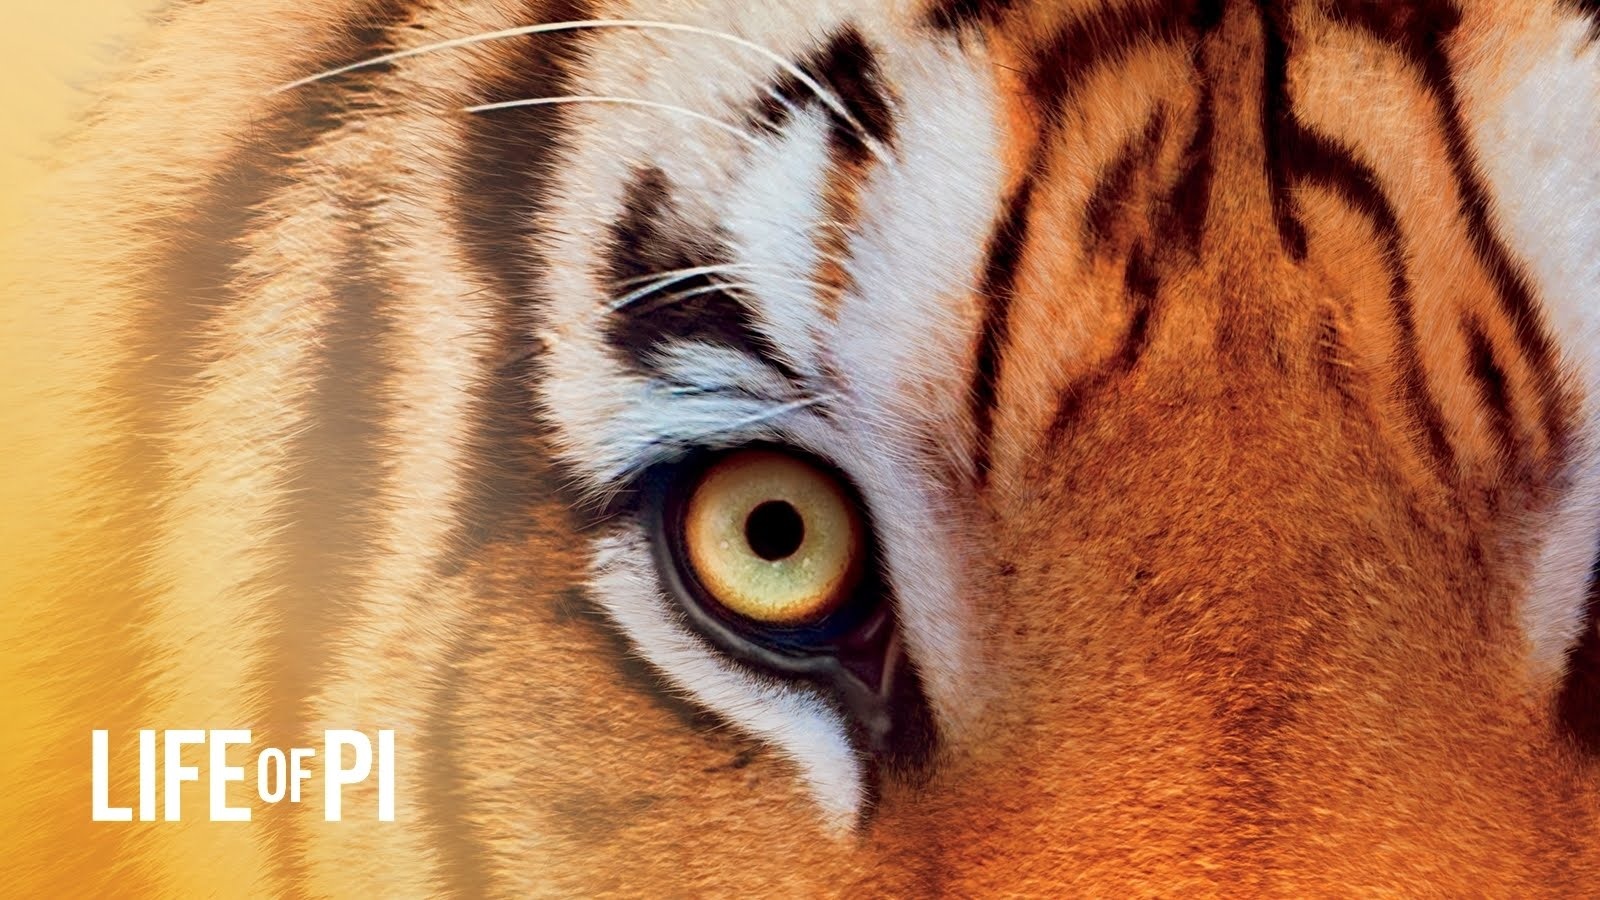 Life of Pi Blu-Ray Steelbook Limited Edition is coming from the UK